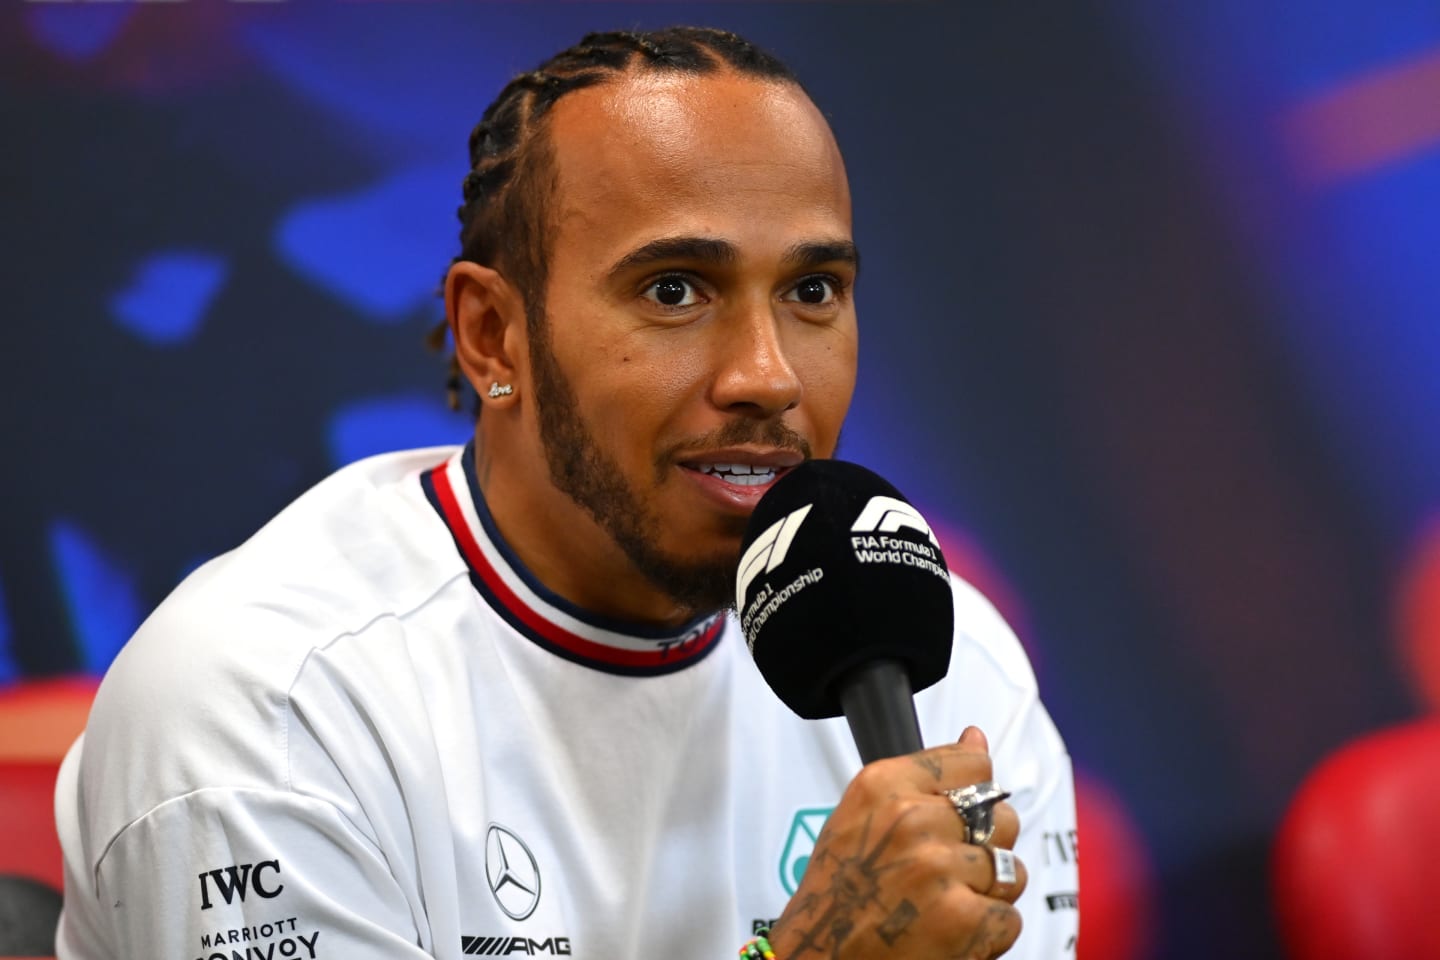 SPA, BELGIUM - AUGUST 25: Lewis Hamilton of Great Britain and Mercedes talks in the Drivers Press Conference during previews ahead of the F1 Grand Prix of Belgium at Circuit de Spa-Francorchamps on August 25, 2022 in Spa, Belgium. (Photo by Dan Mullan/Getty Images)